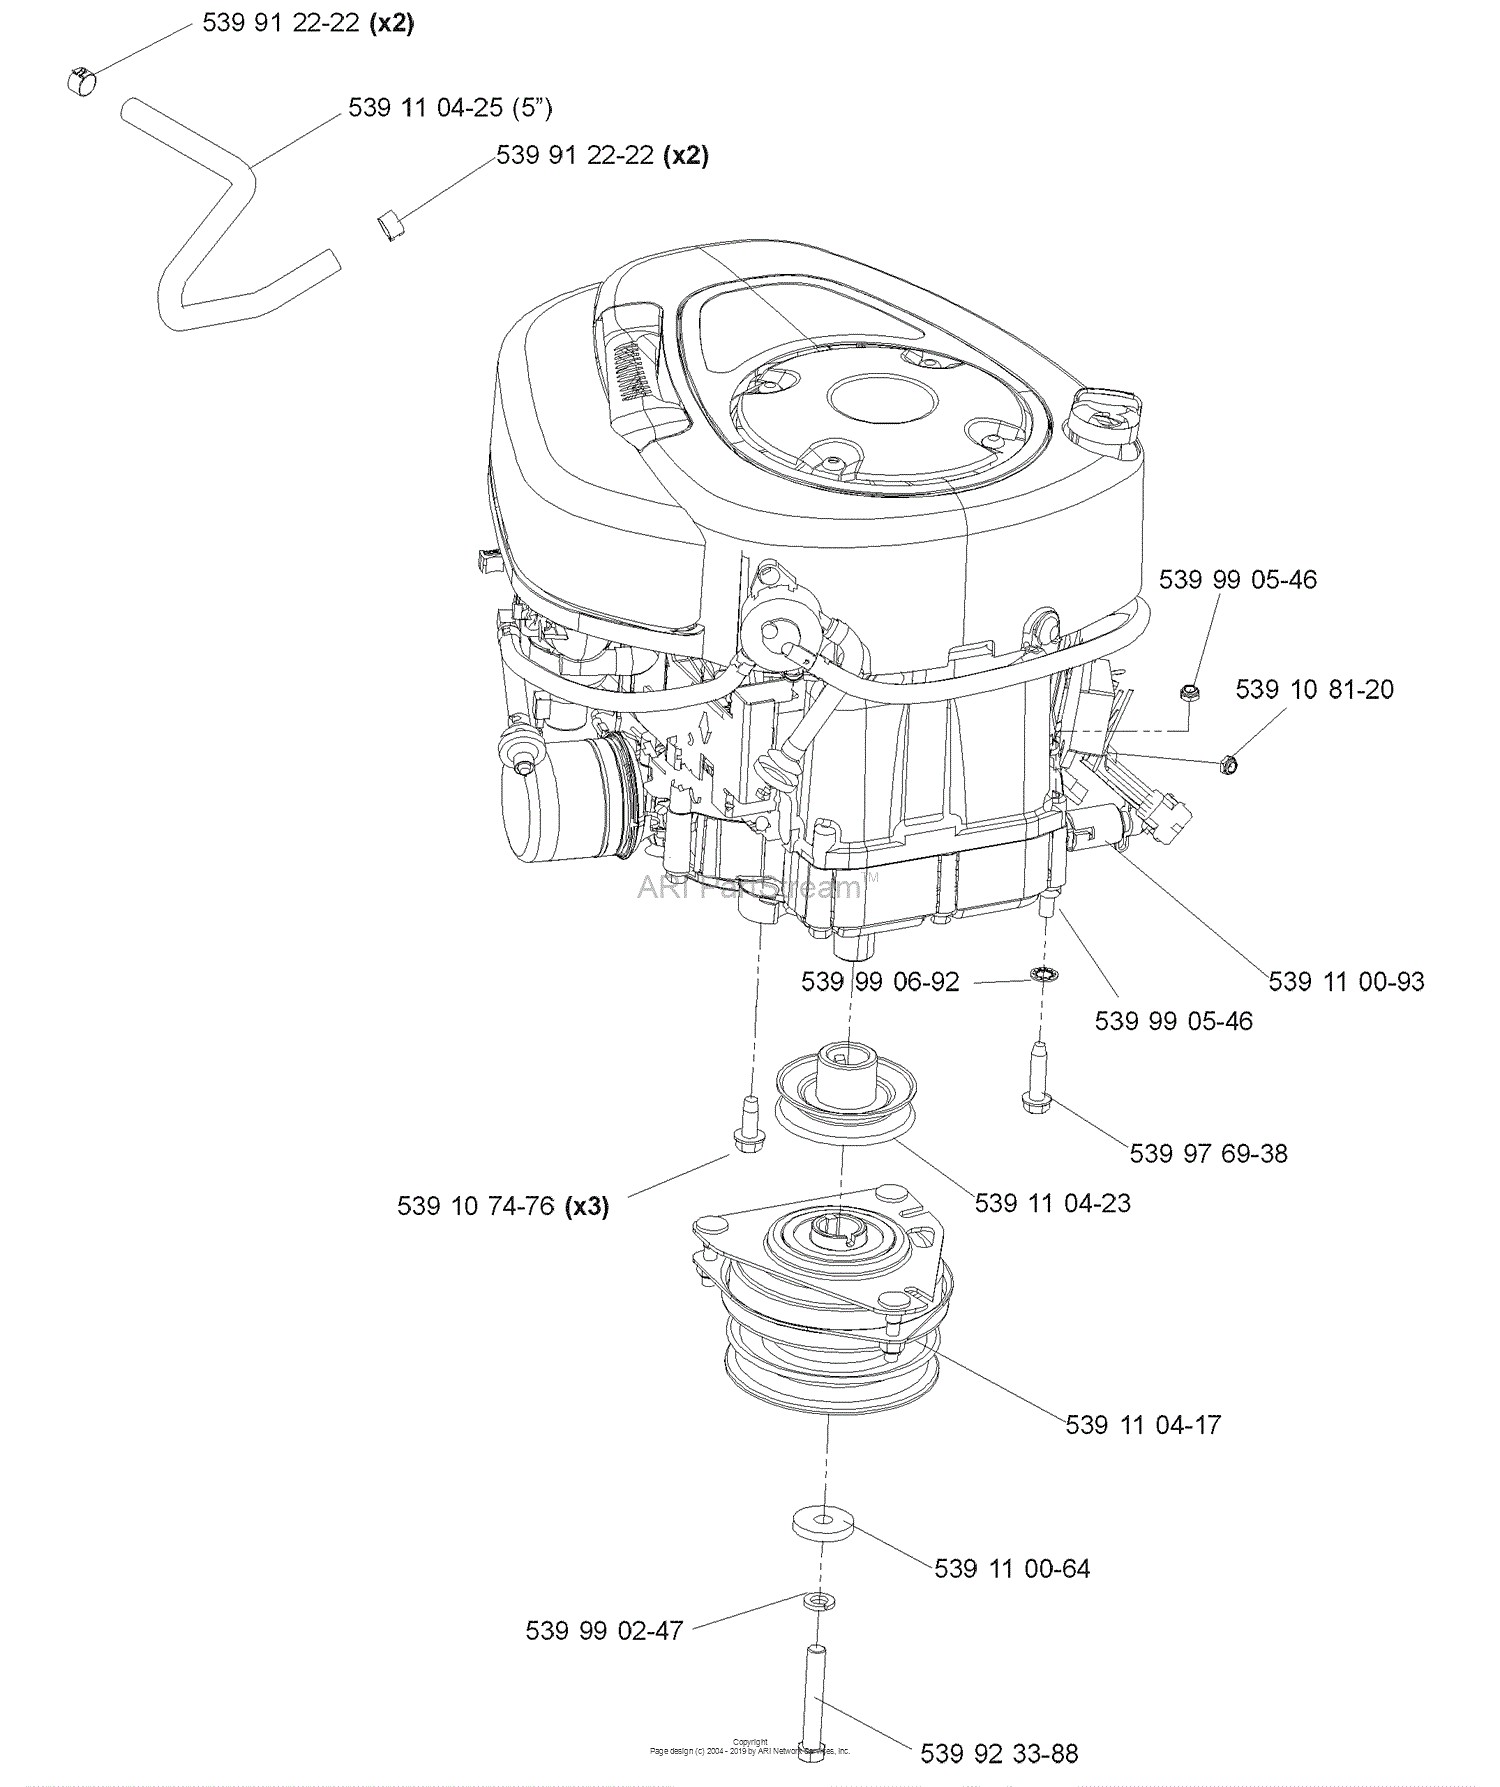 17.5 Briggs and Stratton Engine Diagram Husqvarna Z 3815 Bia 2006 04 Parts Diagram for Engine assembly 15 & 17 5 Hp Of 17.5 Briggs and Stratton Engine Diagram